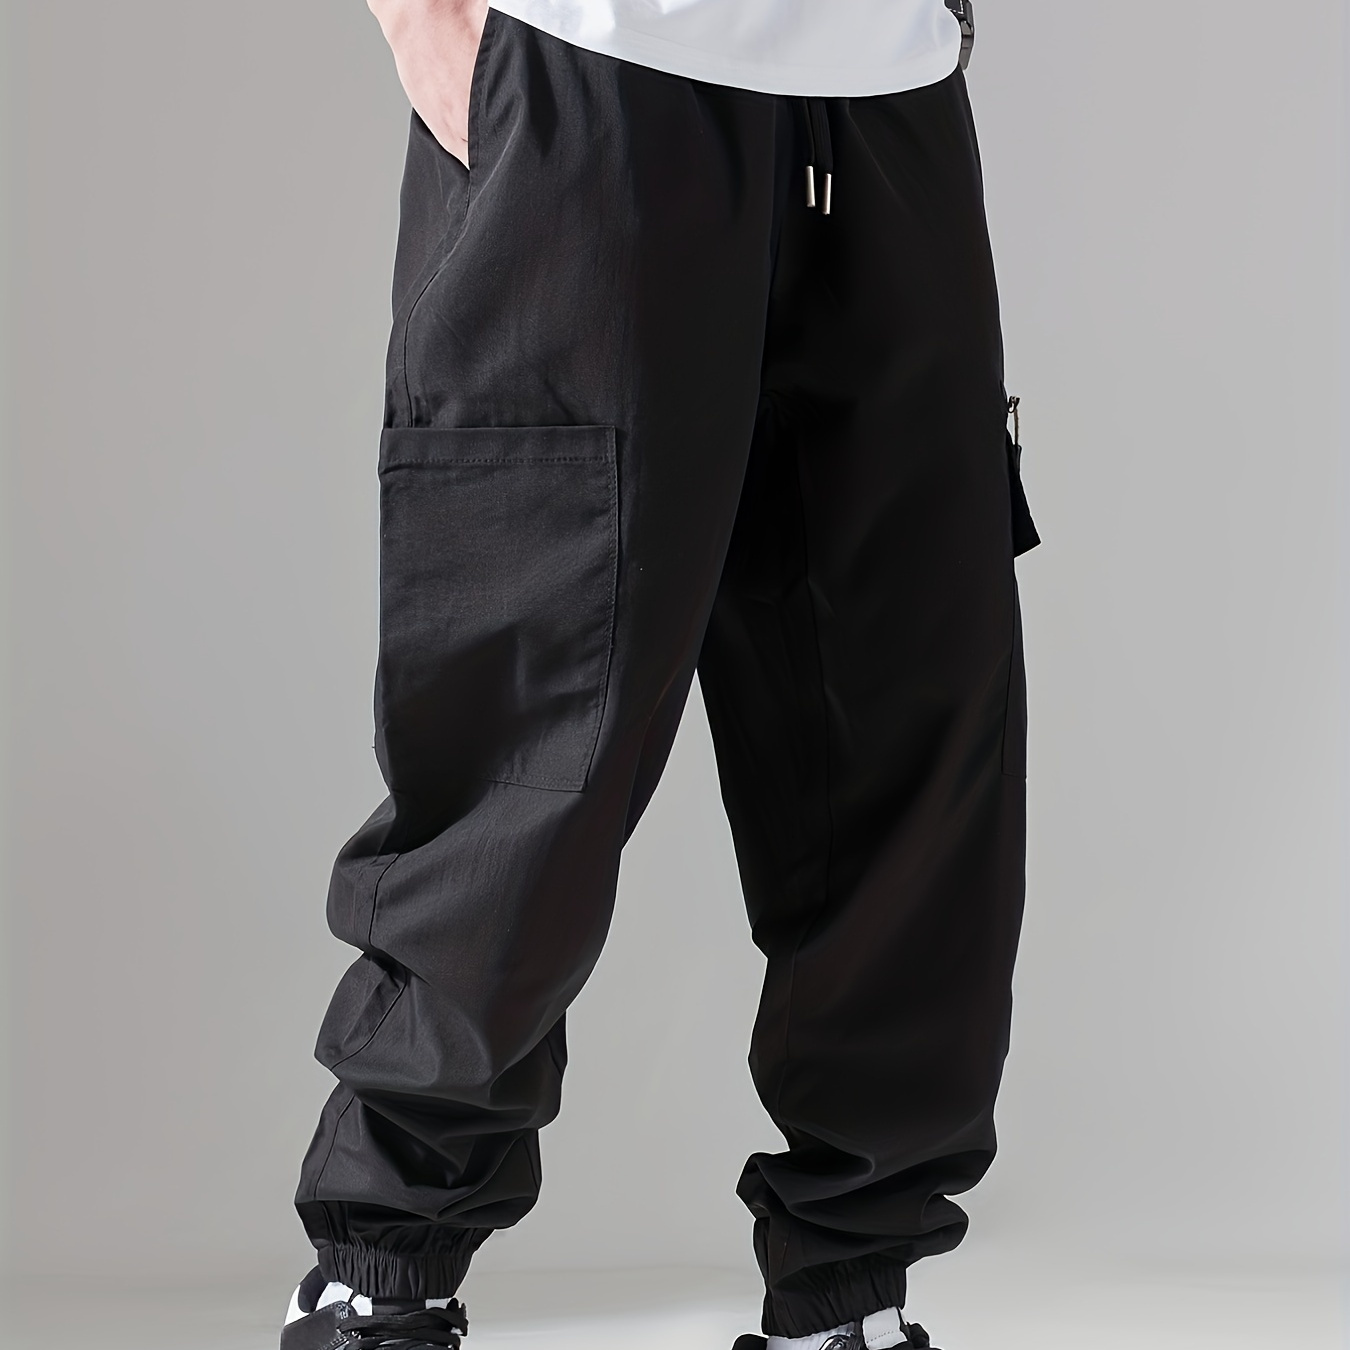 

Men's Casual Solid Cargo Pants With Pockets, Elastic Waistband And Cuff Loose Trousers, Streetwear Style Durable Fabric Sports Pants